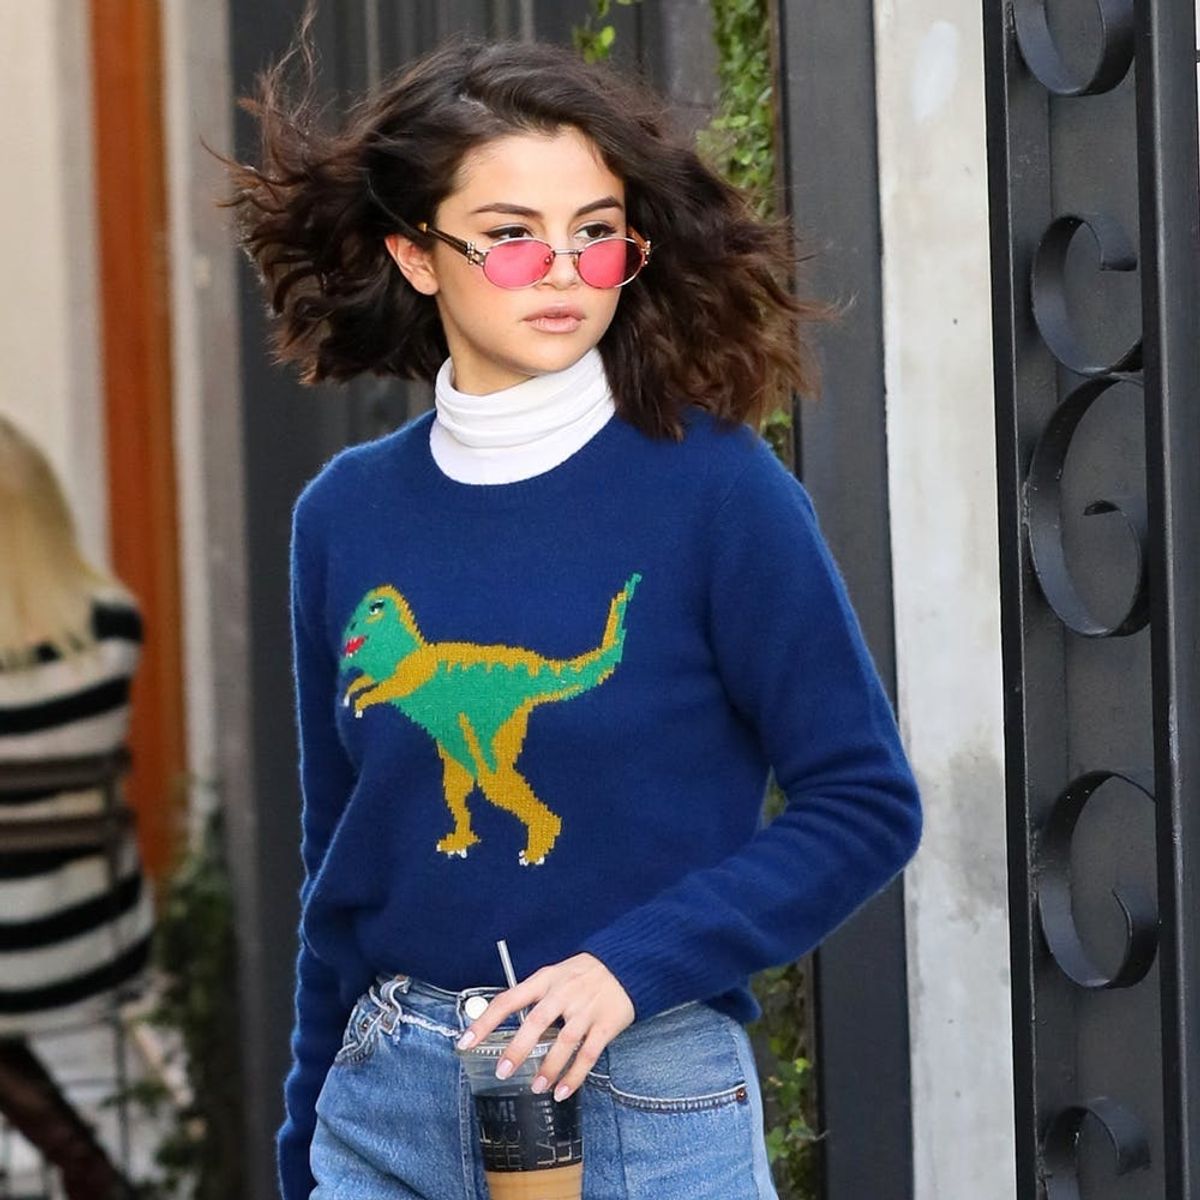 Selena Gomez’s Textured New ‘Do Will Have You Jonesing for a Haircut